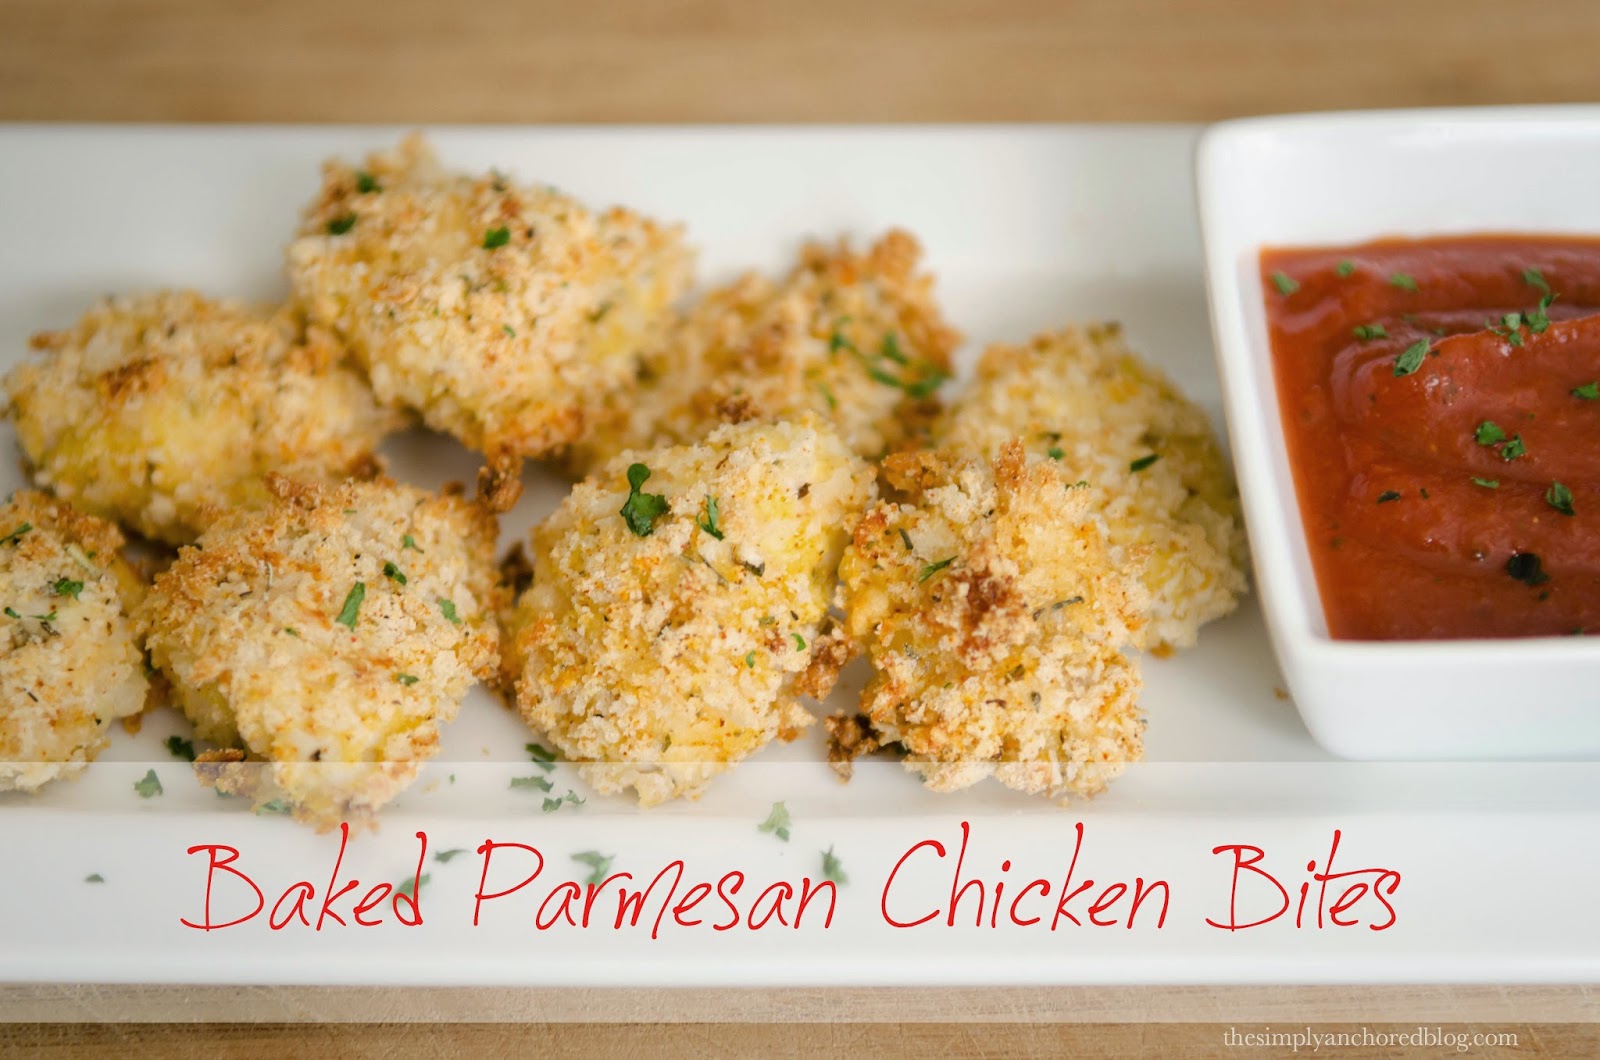 Simply Anchored: Baked Parmesan Chicken Bites